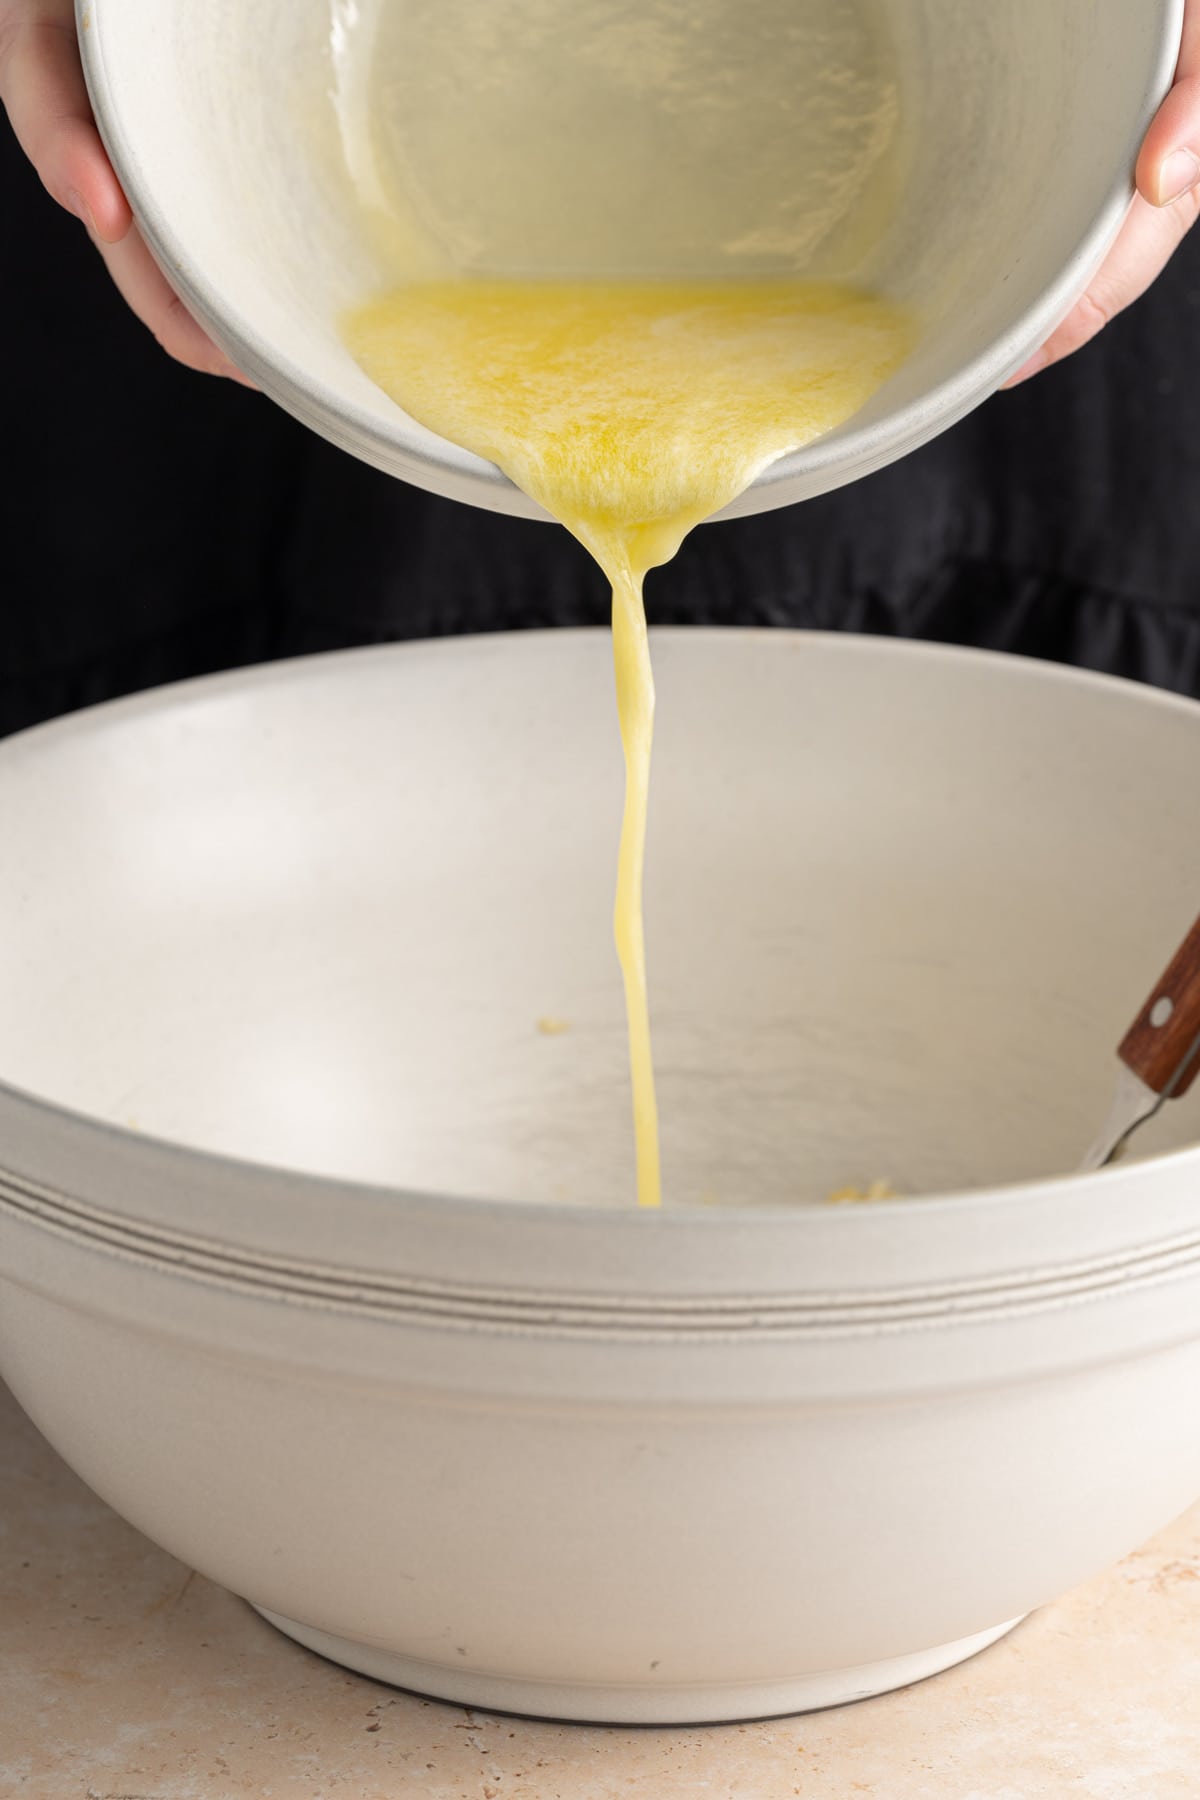 Adding melted butter to large mixing bowl with smashed banana